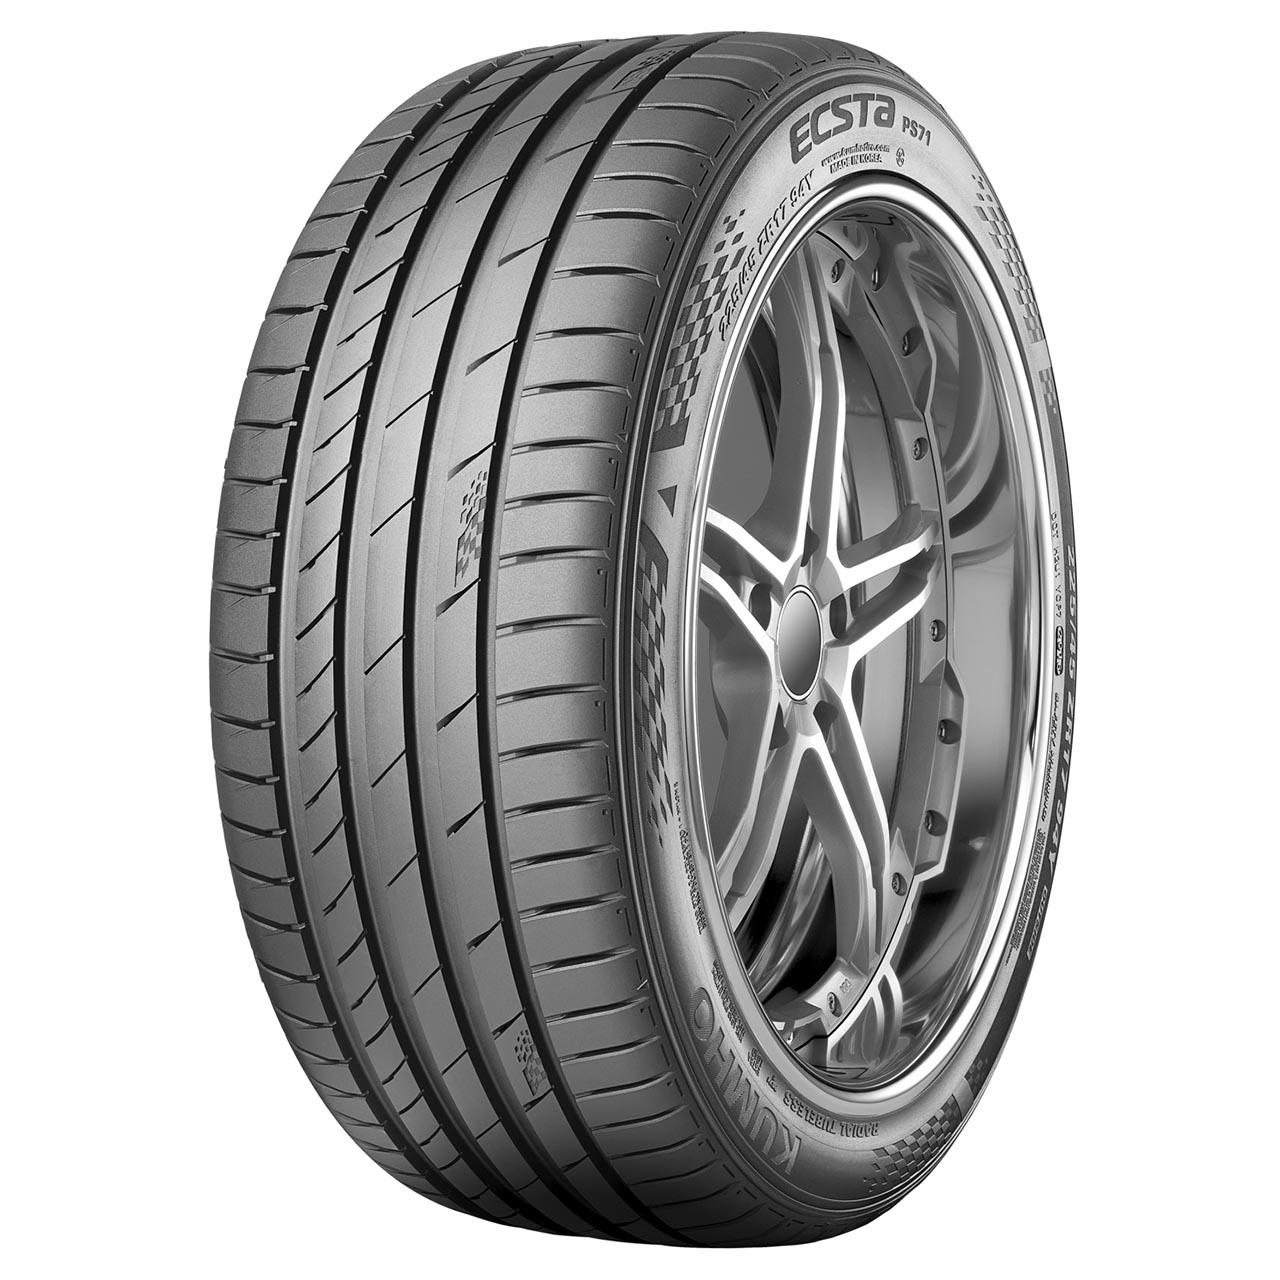 Kumho Ecsta PS71 225/40ZR18 88Y XRP